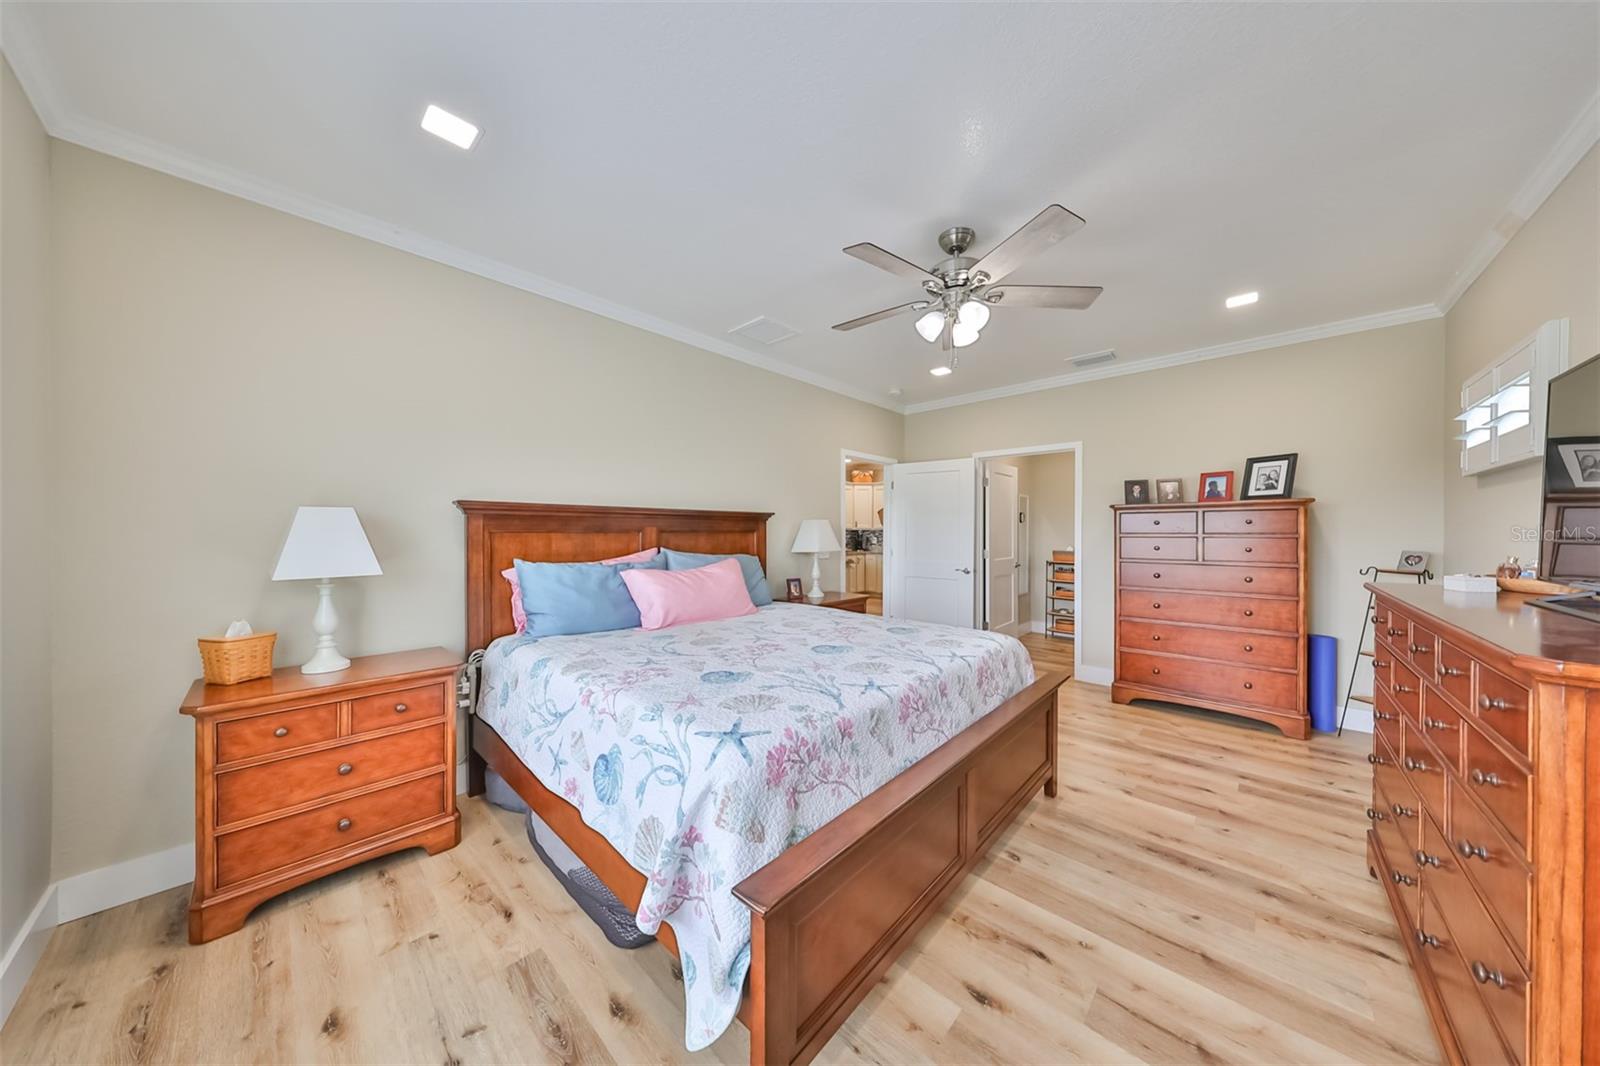 Primary bedroom is large enough for this king sized bed AND furniture WITH space to spare. Notice the attached ensuite primary bathroom with a large oversized walk in closet.